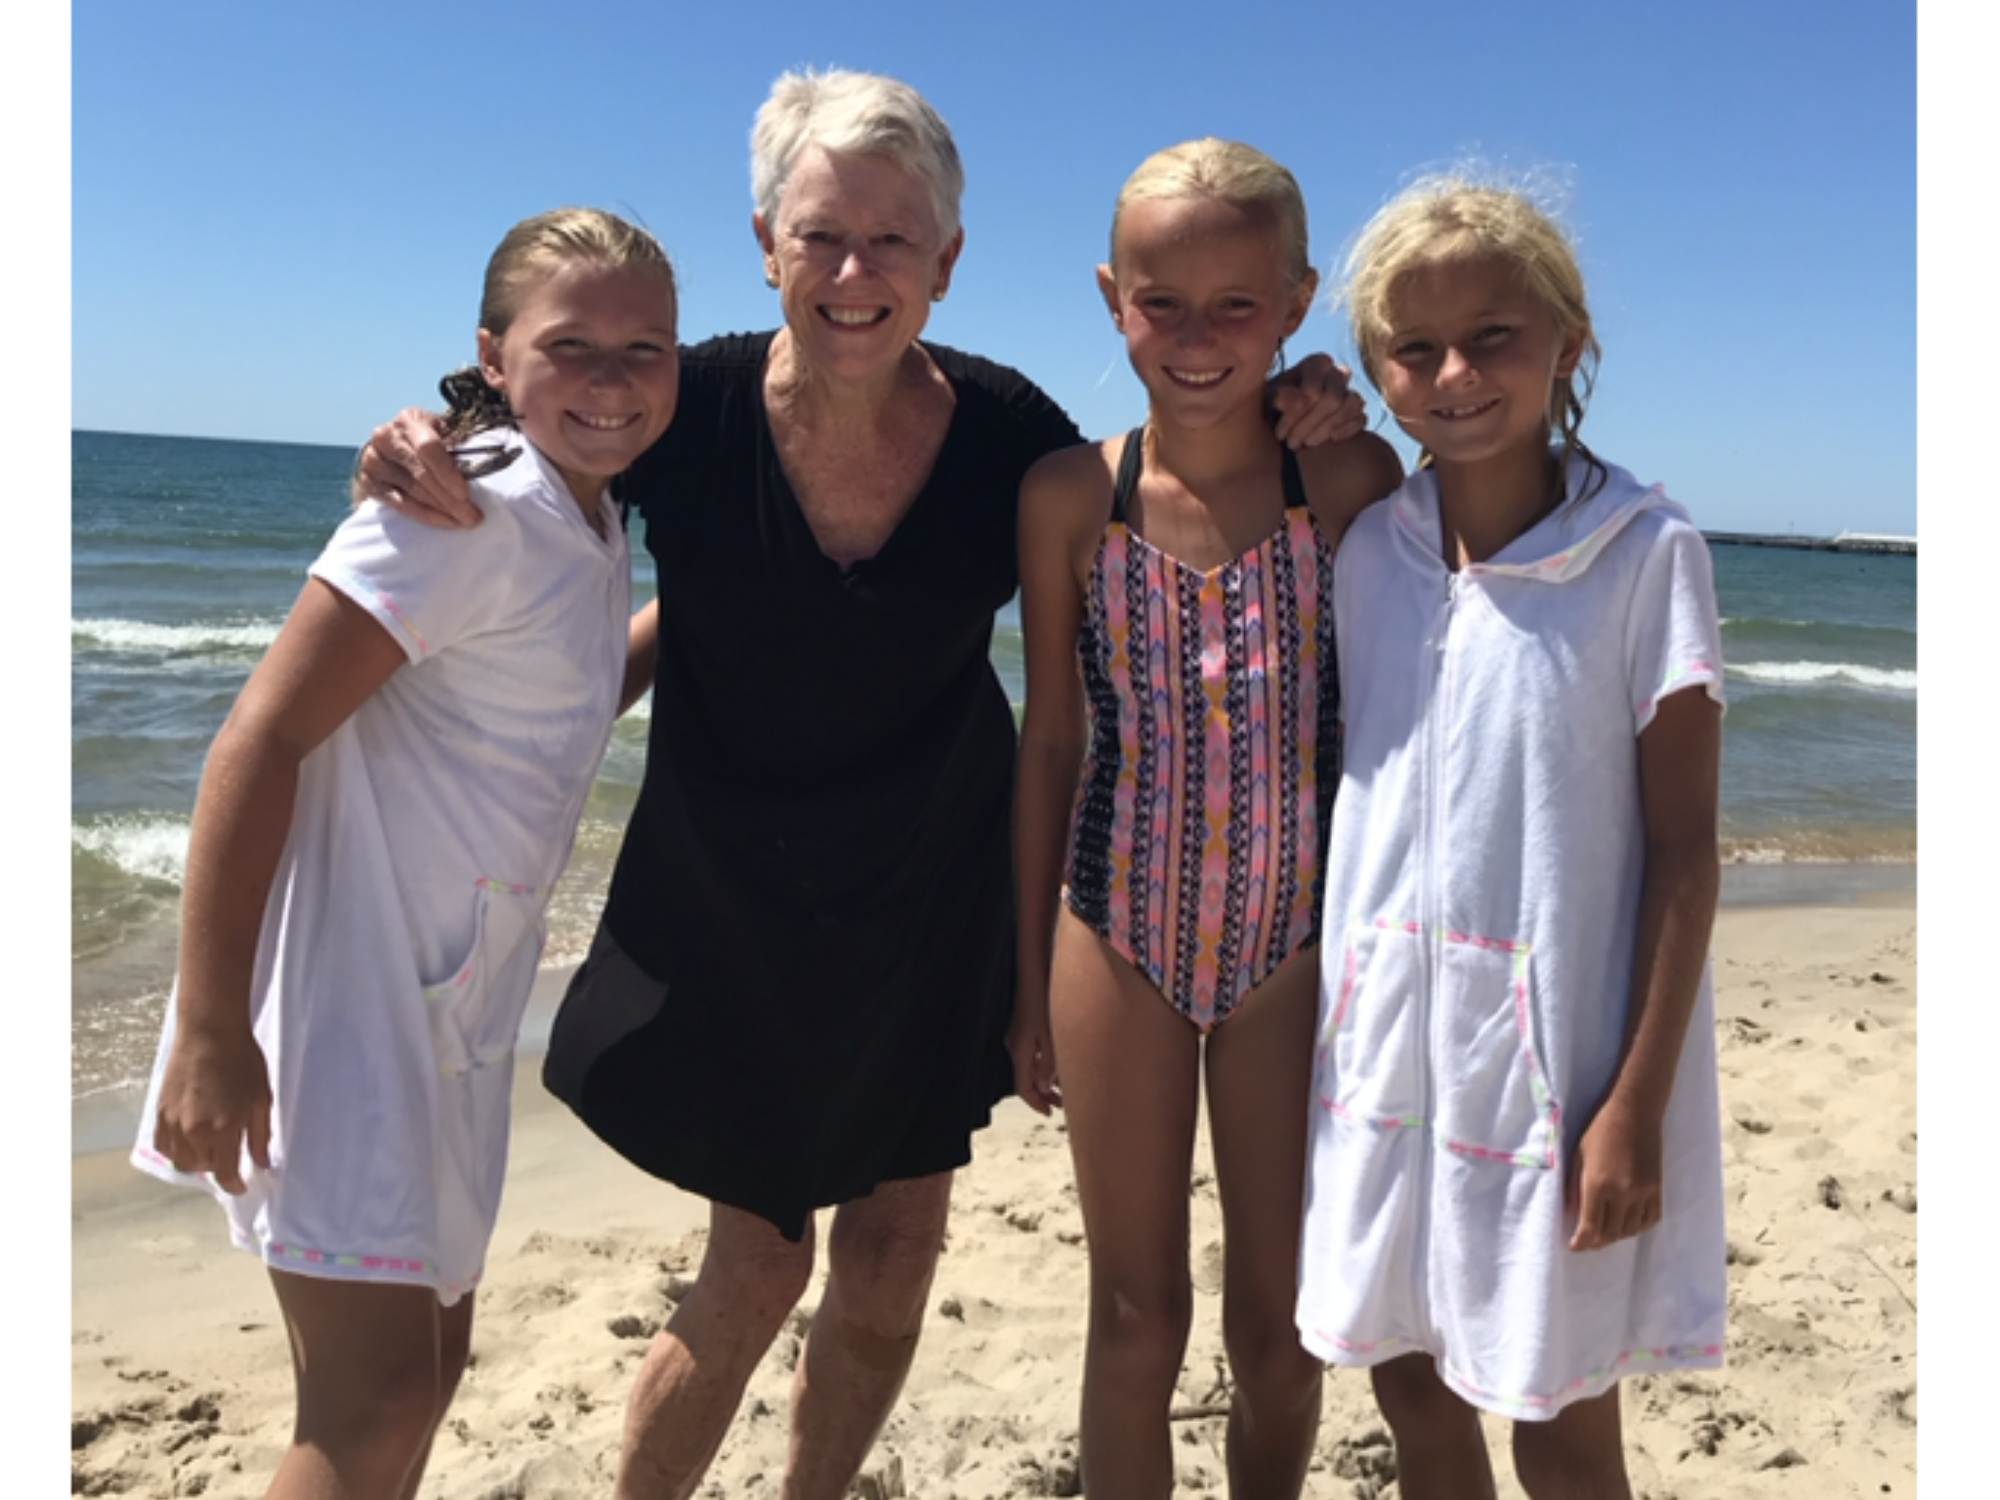 Mary Baker with her granddaughters on Longboat Key during a warm Christmas past.